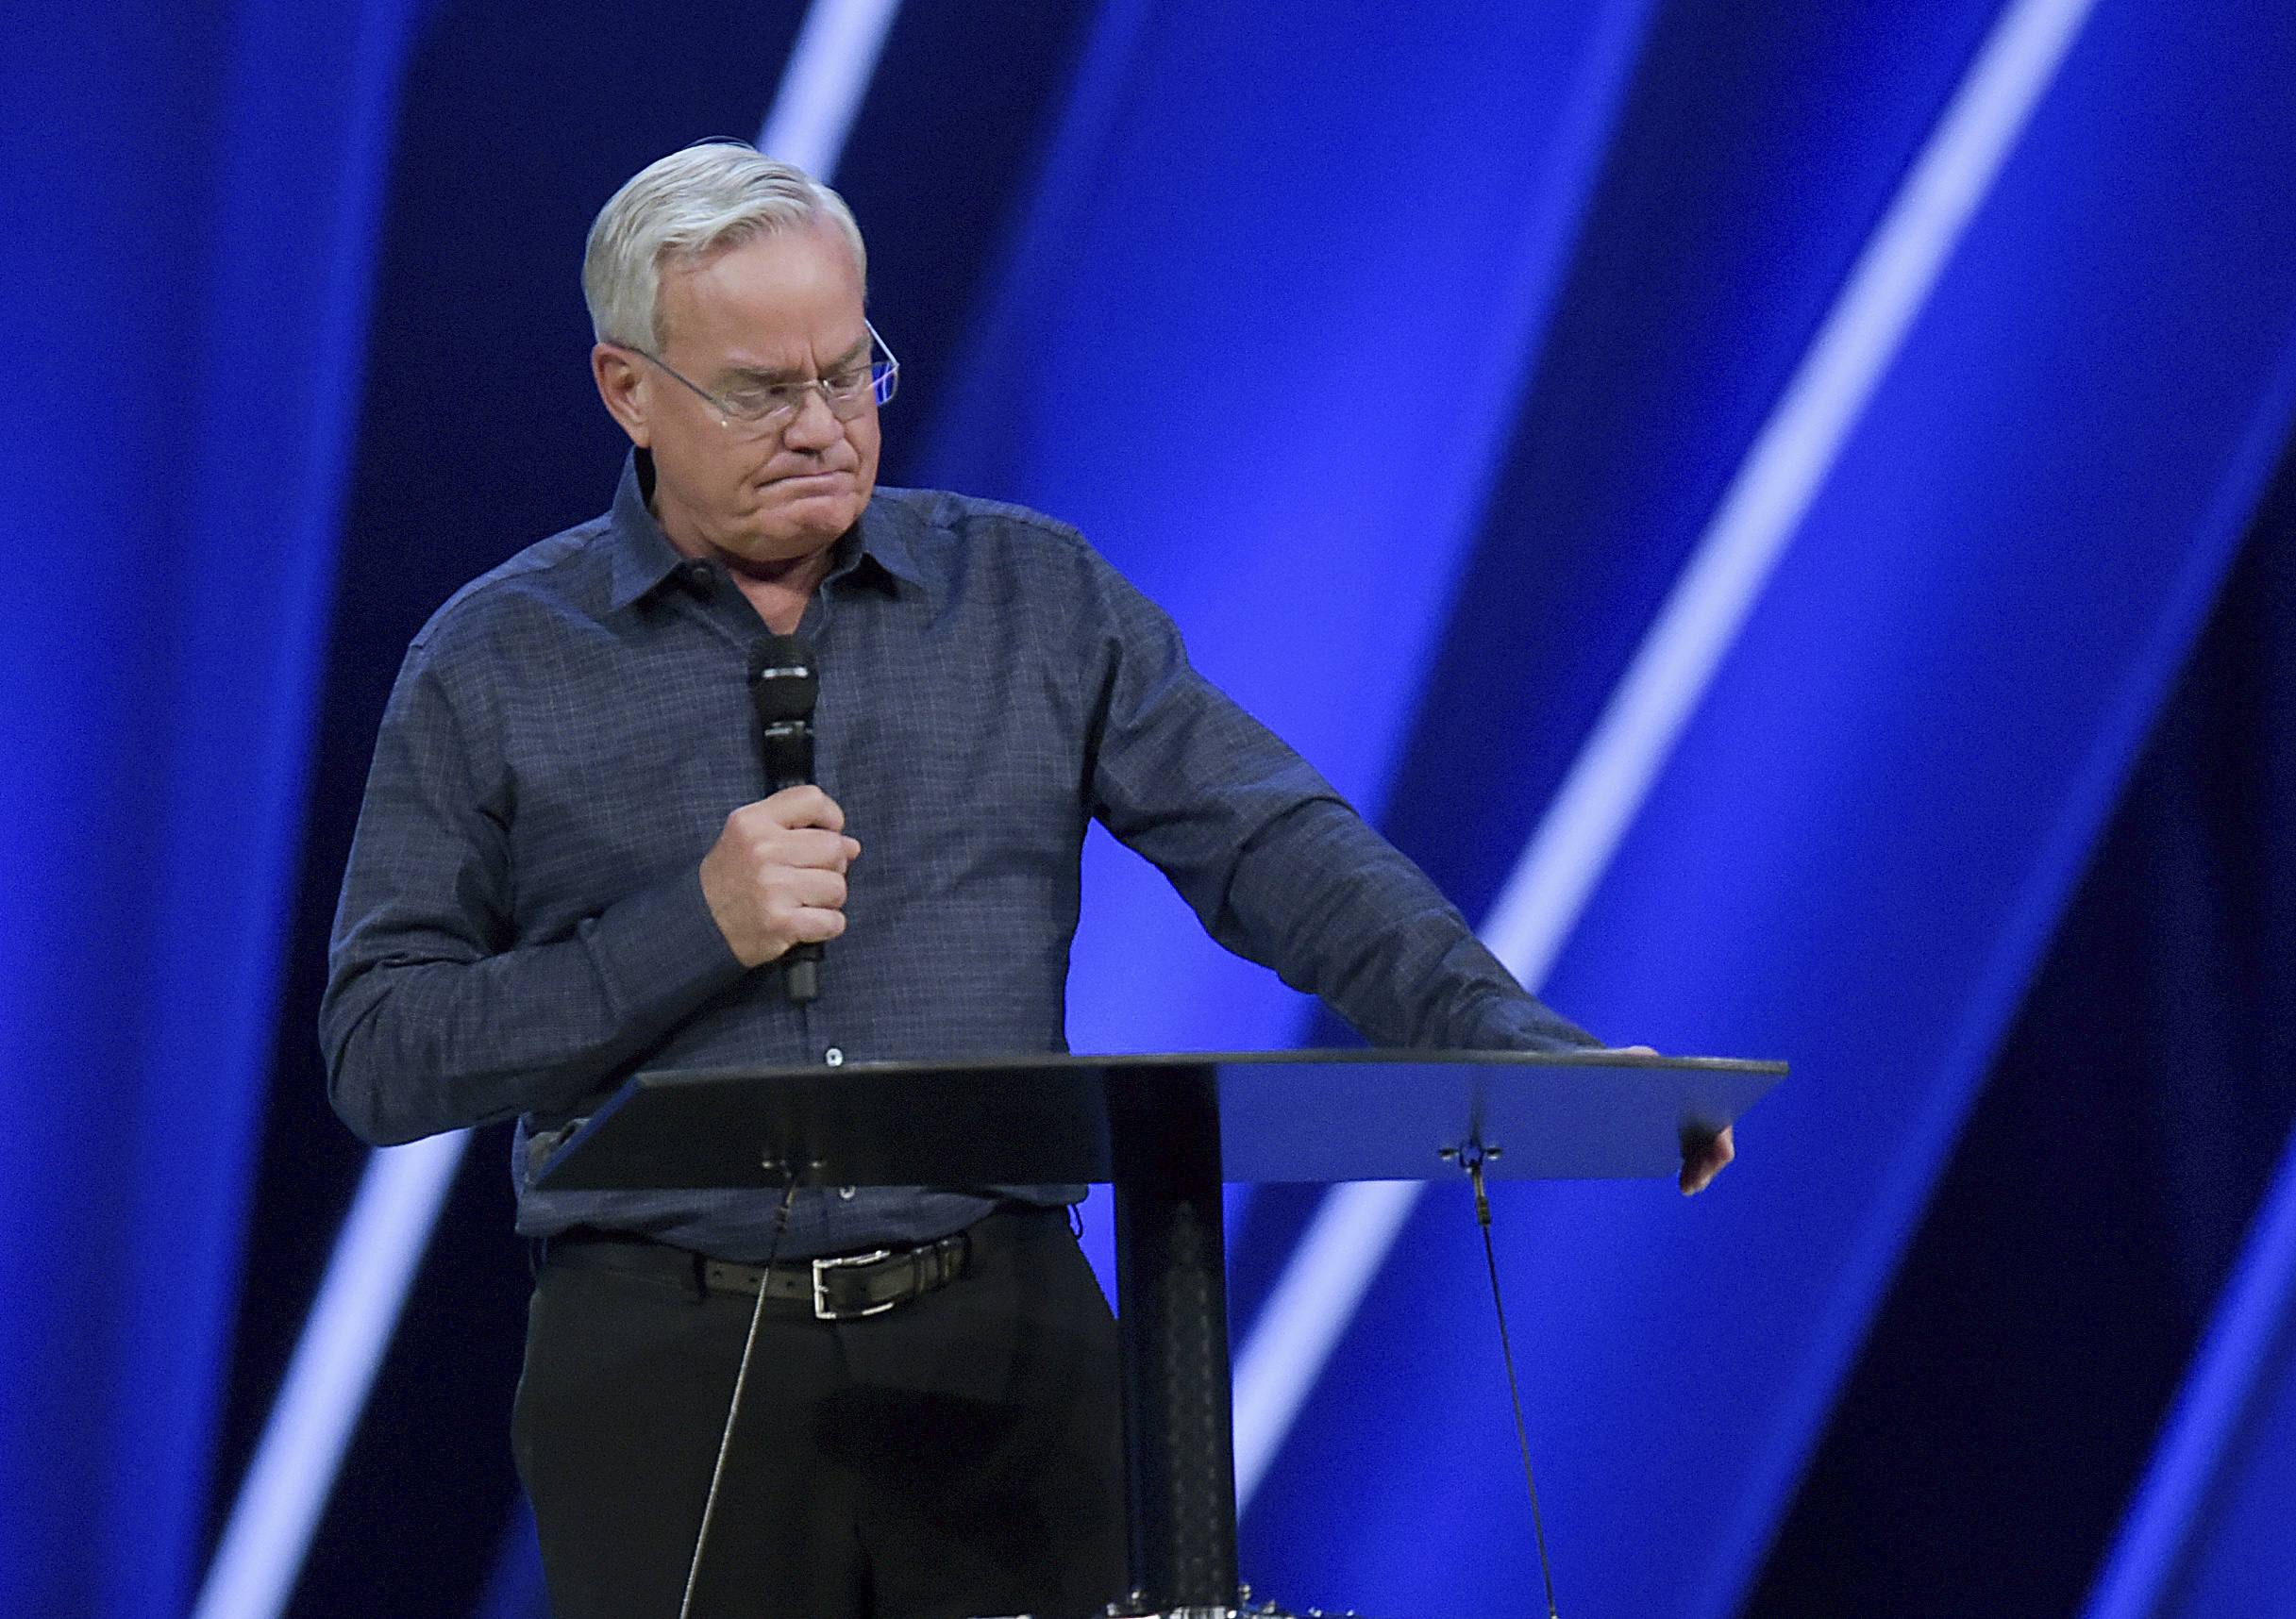 PHOTO: Willow Creek Community Church Senior Pastor Bill Hybels stands before his congregation, April 10, 2018, in South Barrington, Ill., where he announced his early retirement effective immediately.